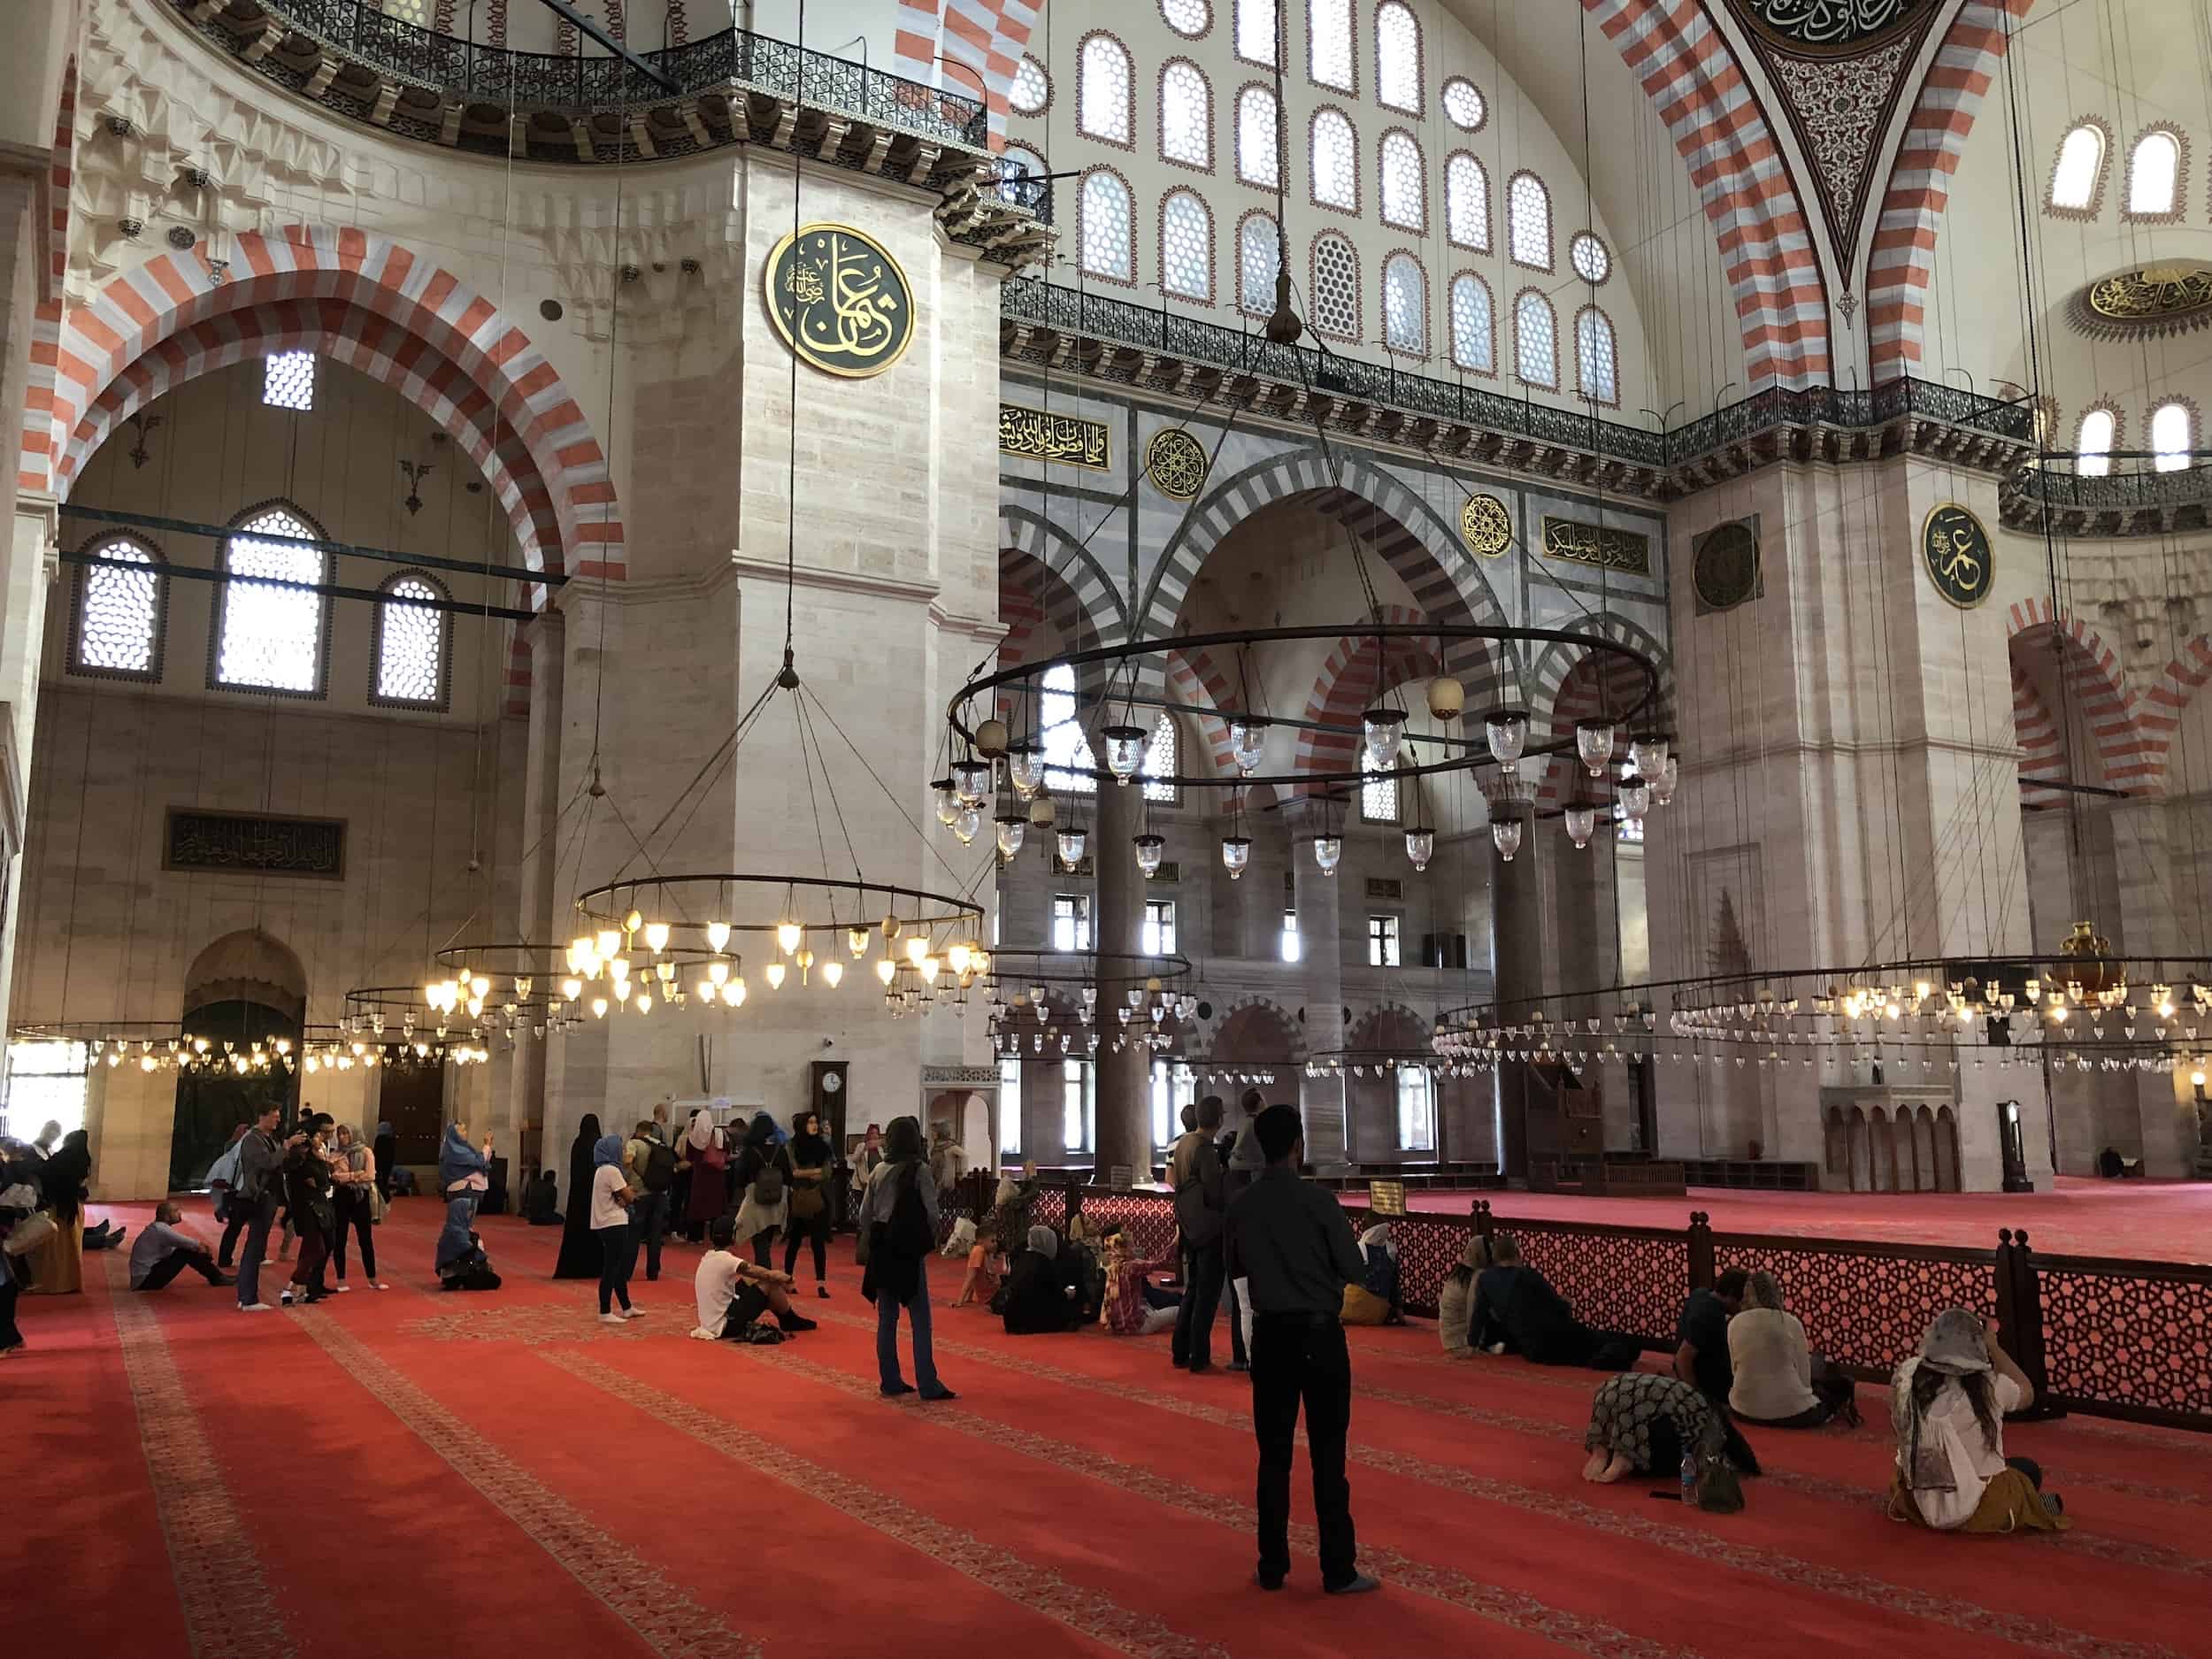 Visitor section of the Süleymaniye Mosque in Istanbul, Turkey